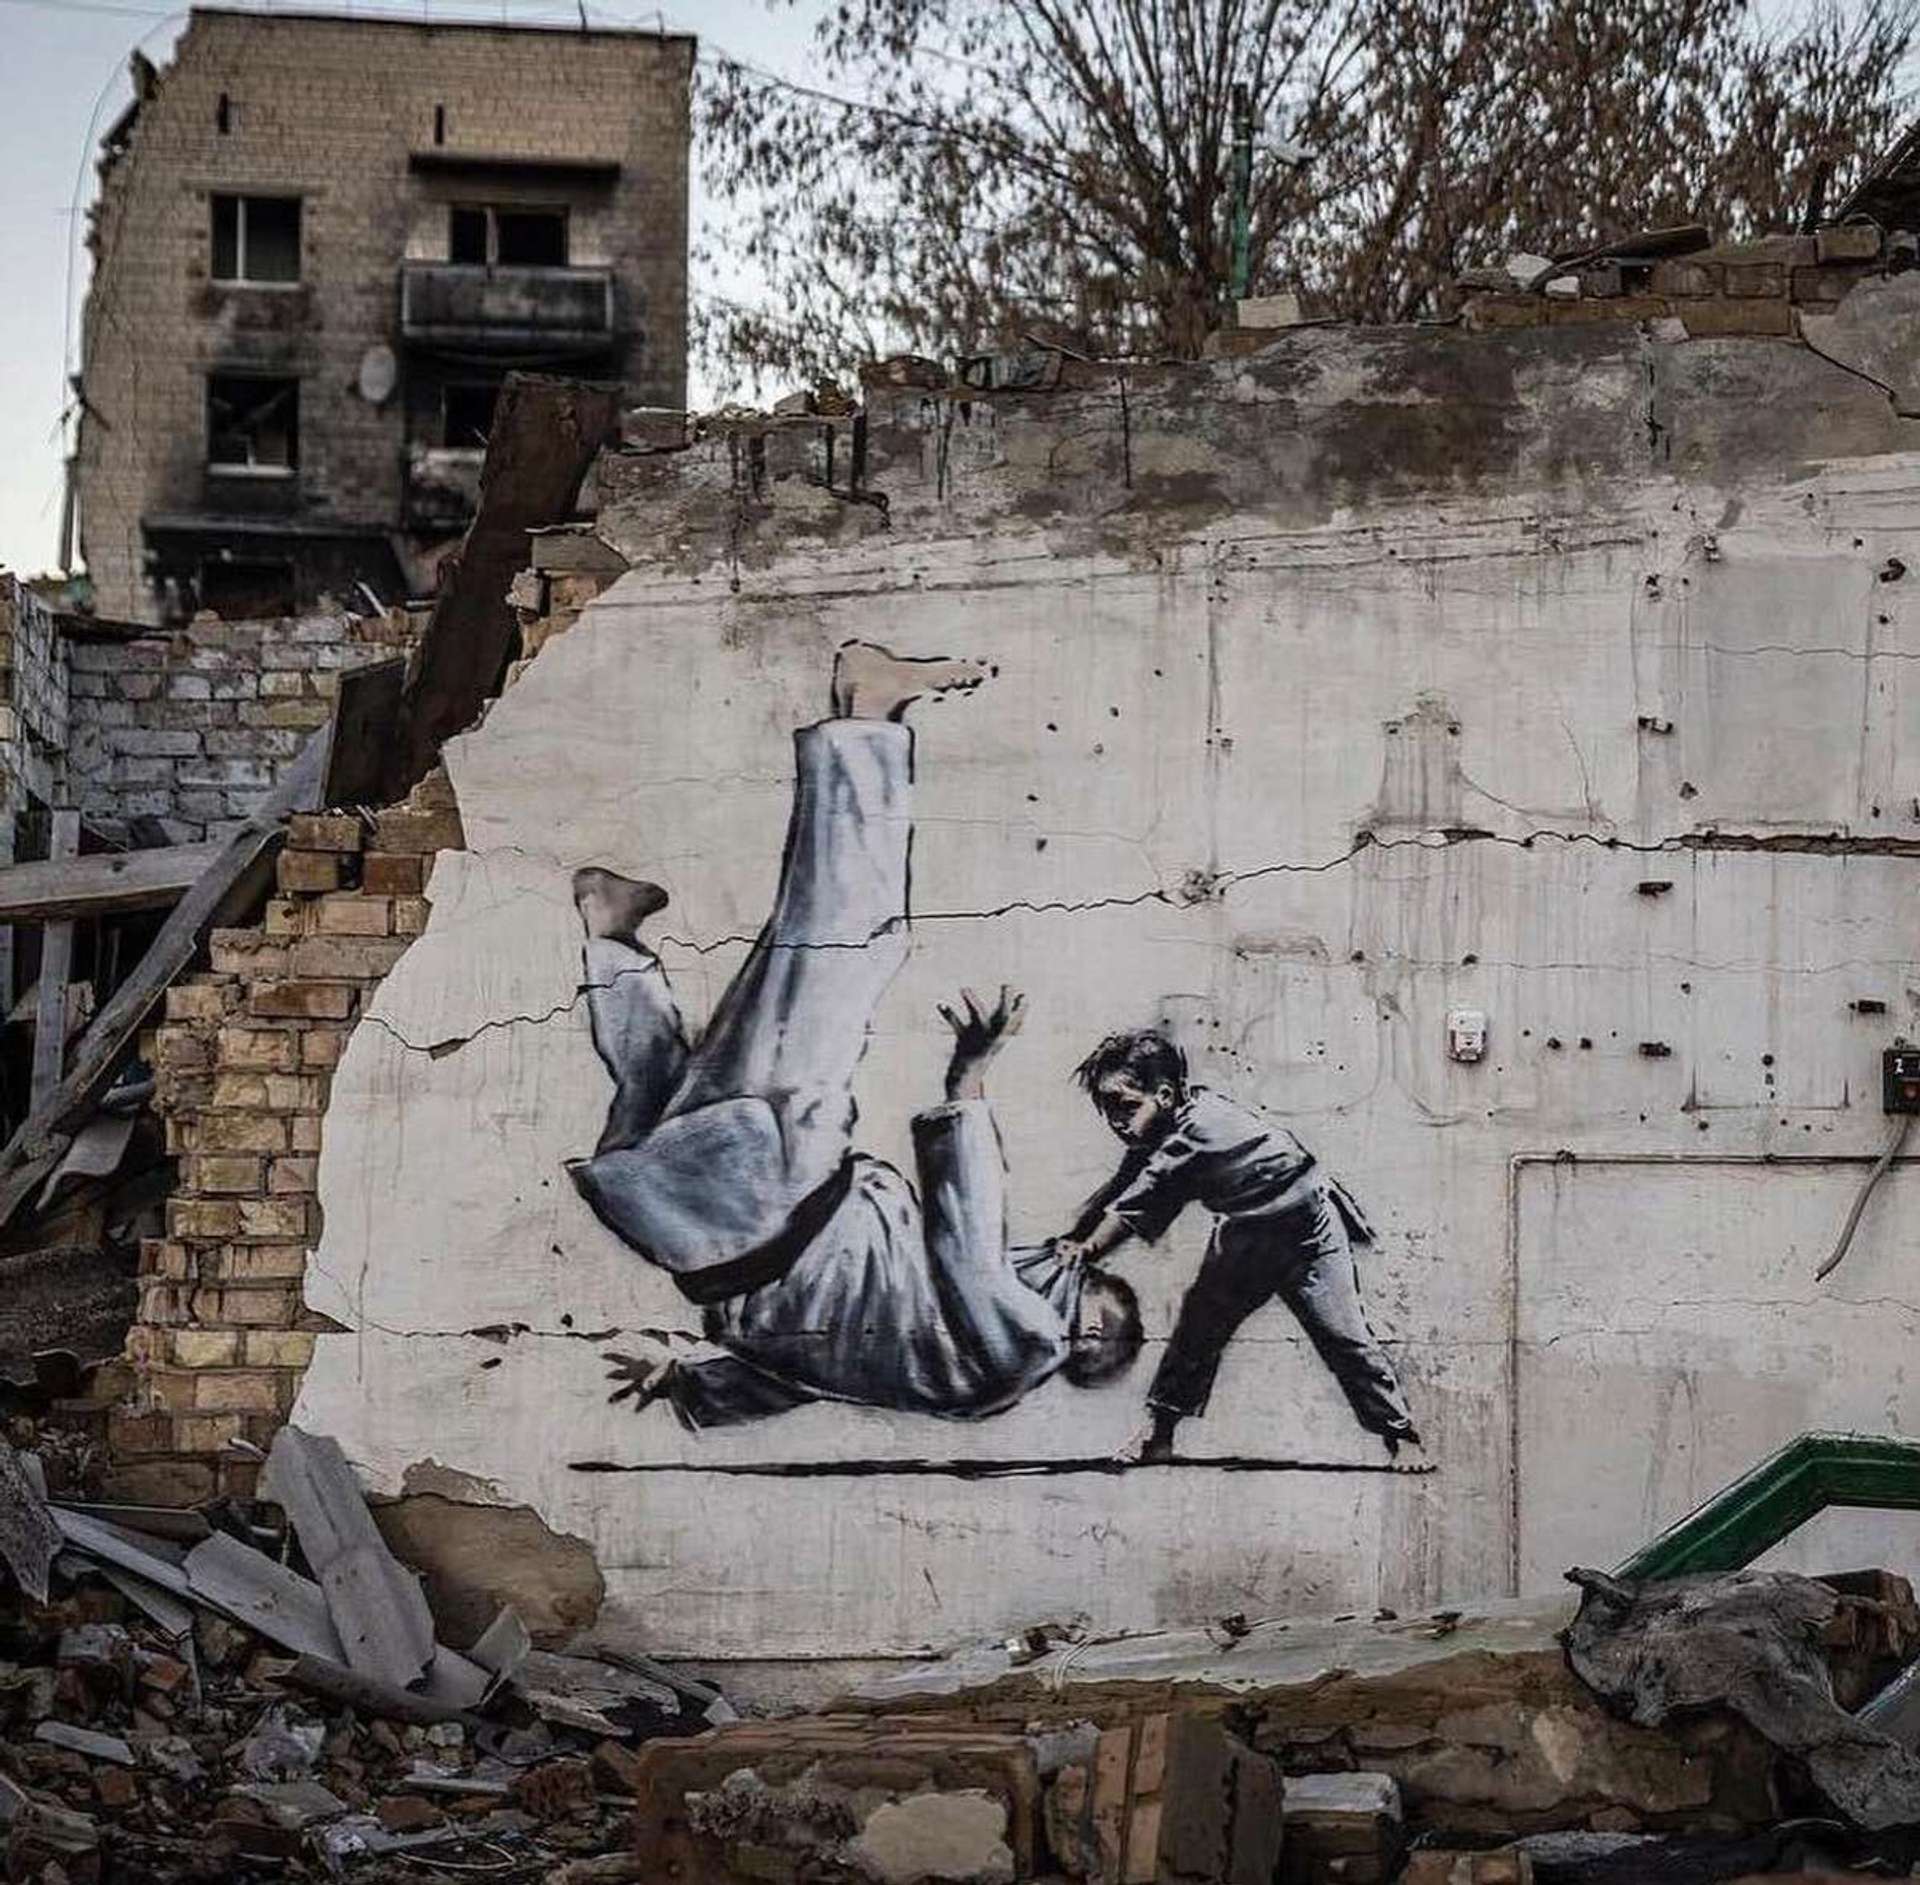 This mural by Banksy is done on the side of a semi ruined building. It shows a young girl knocking out a large man using Judo moves.